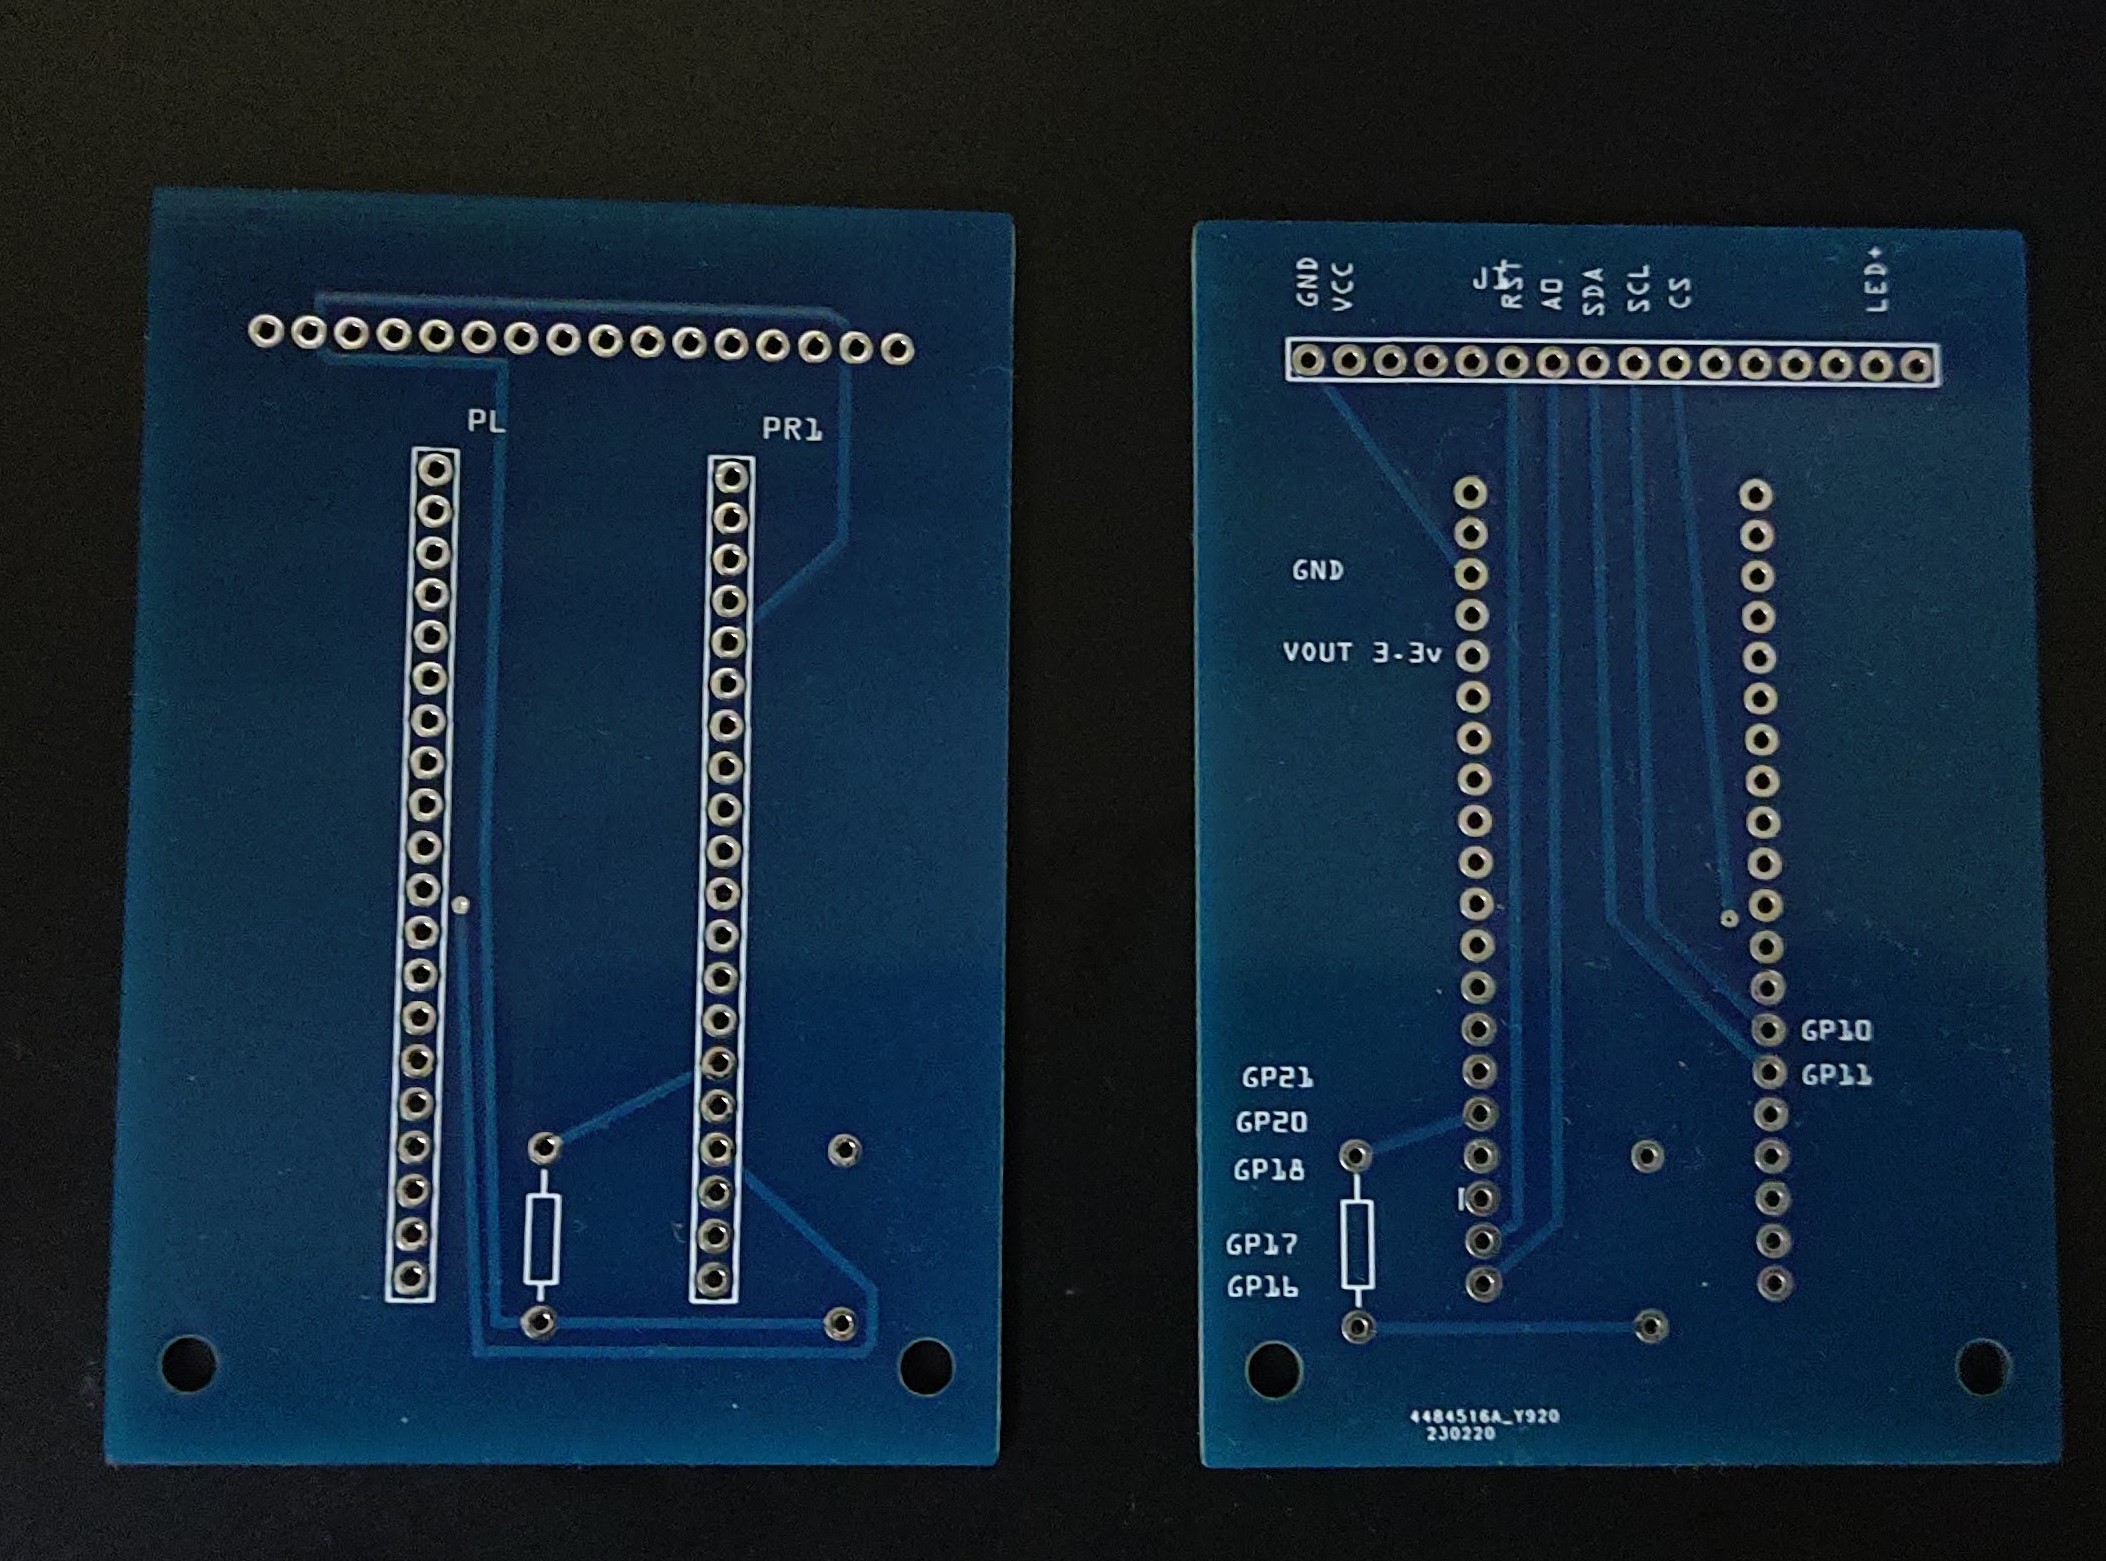 PCB front and back view